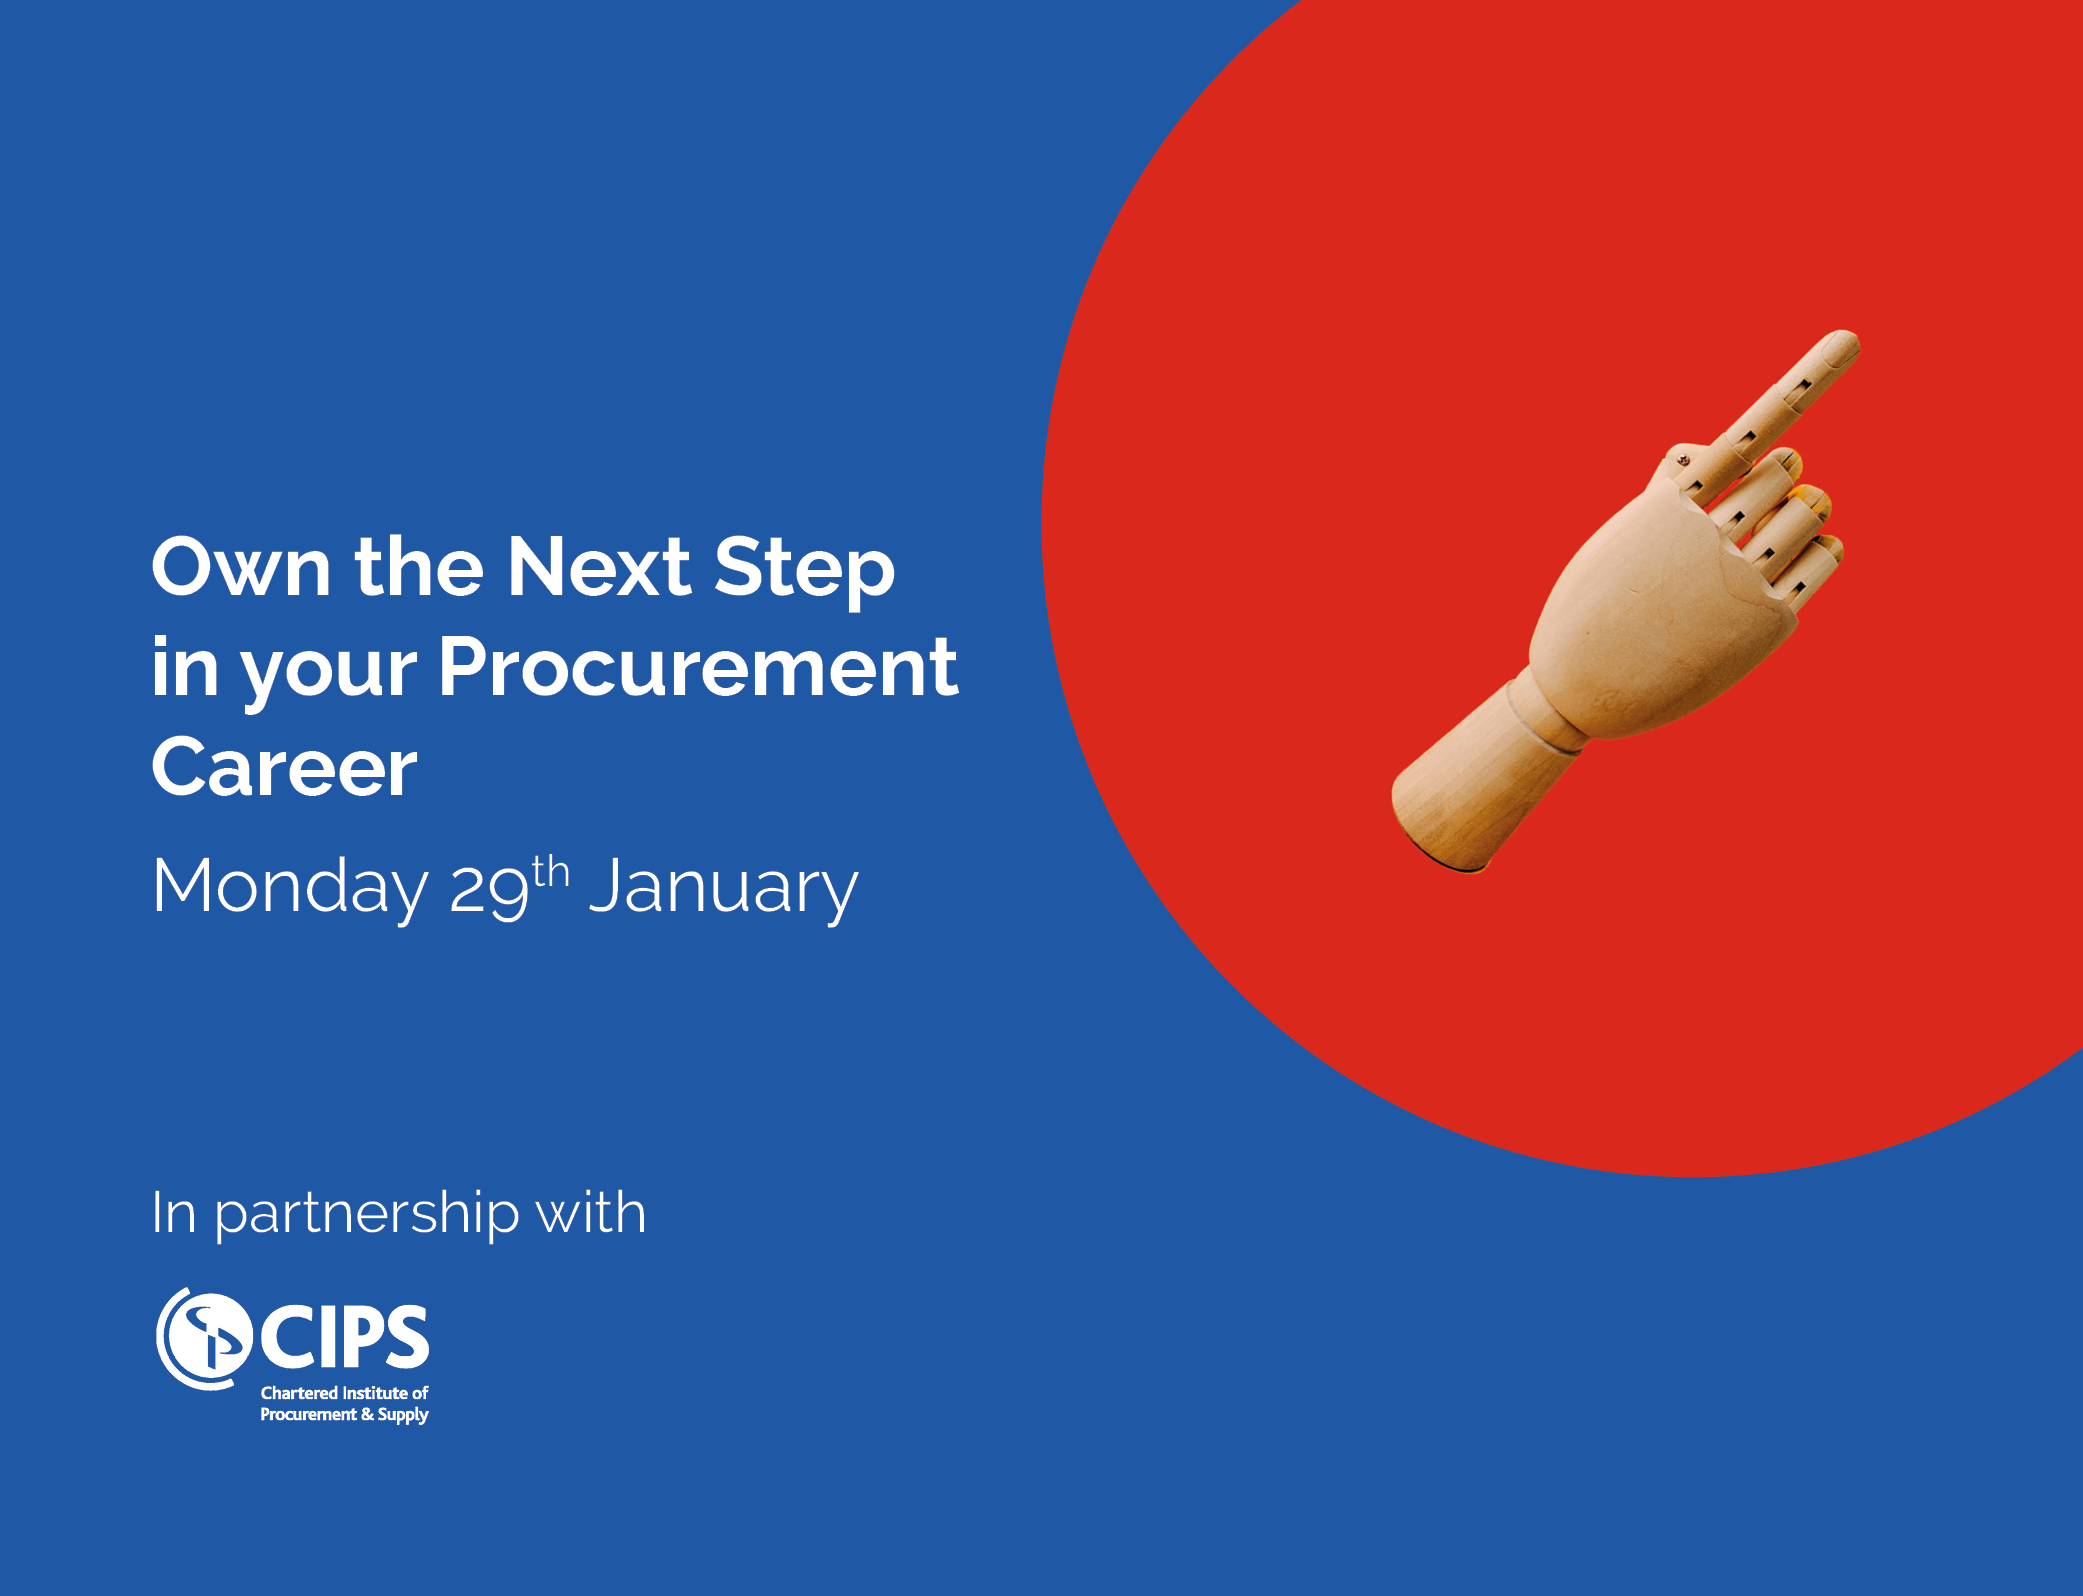 How to Advance Your Procurement Career